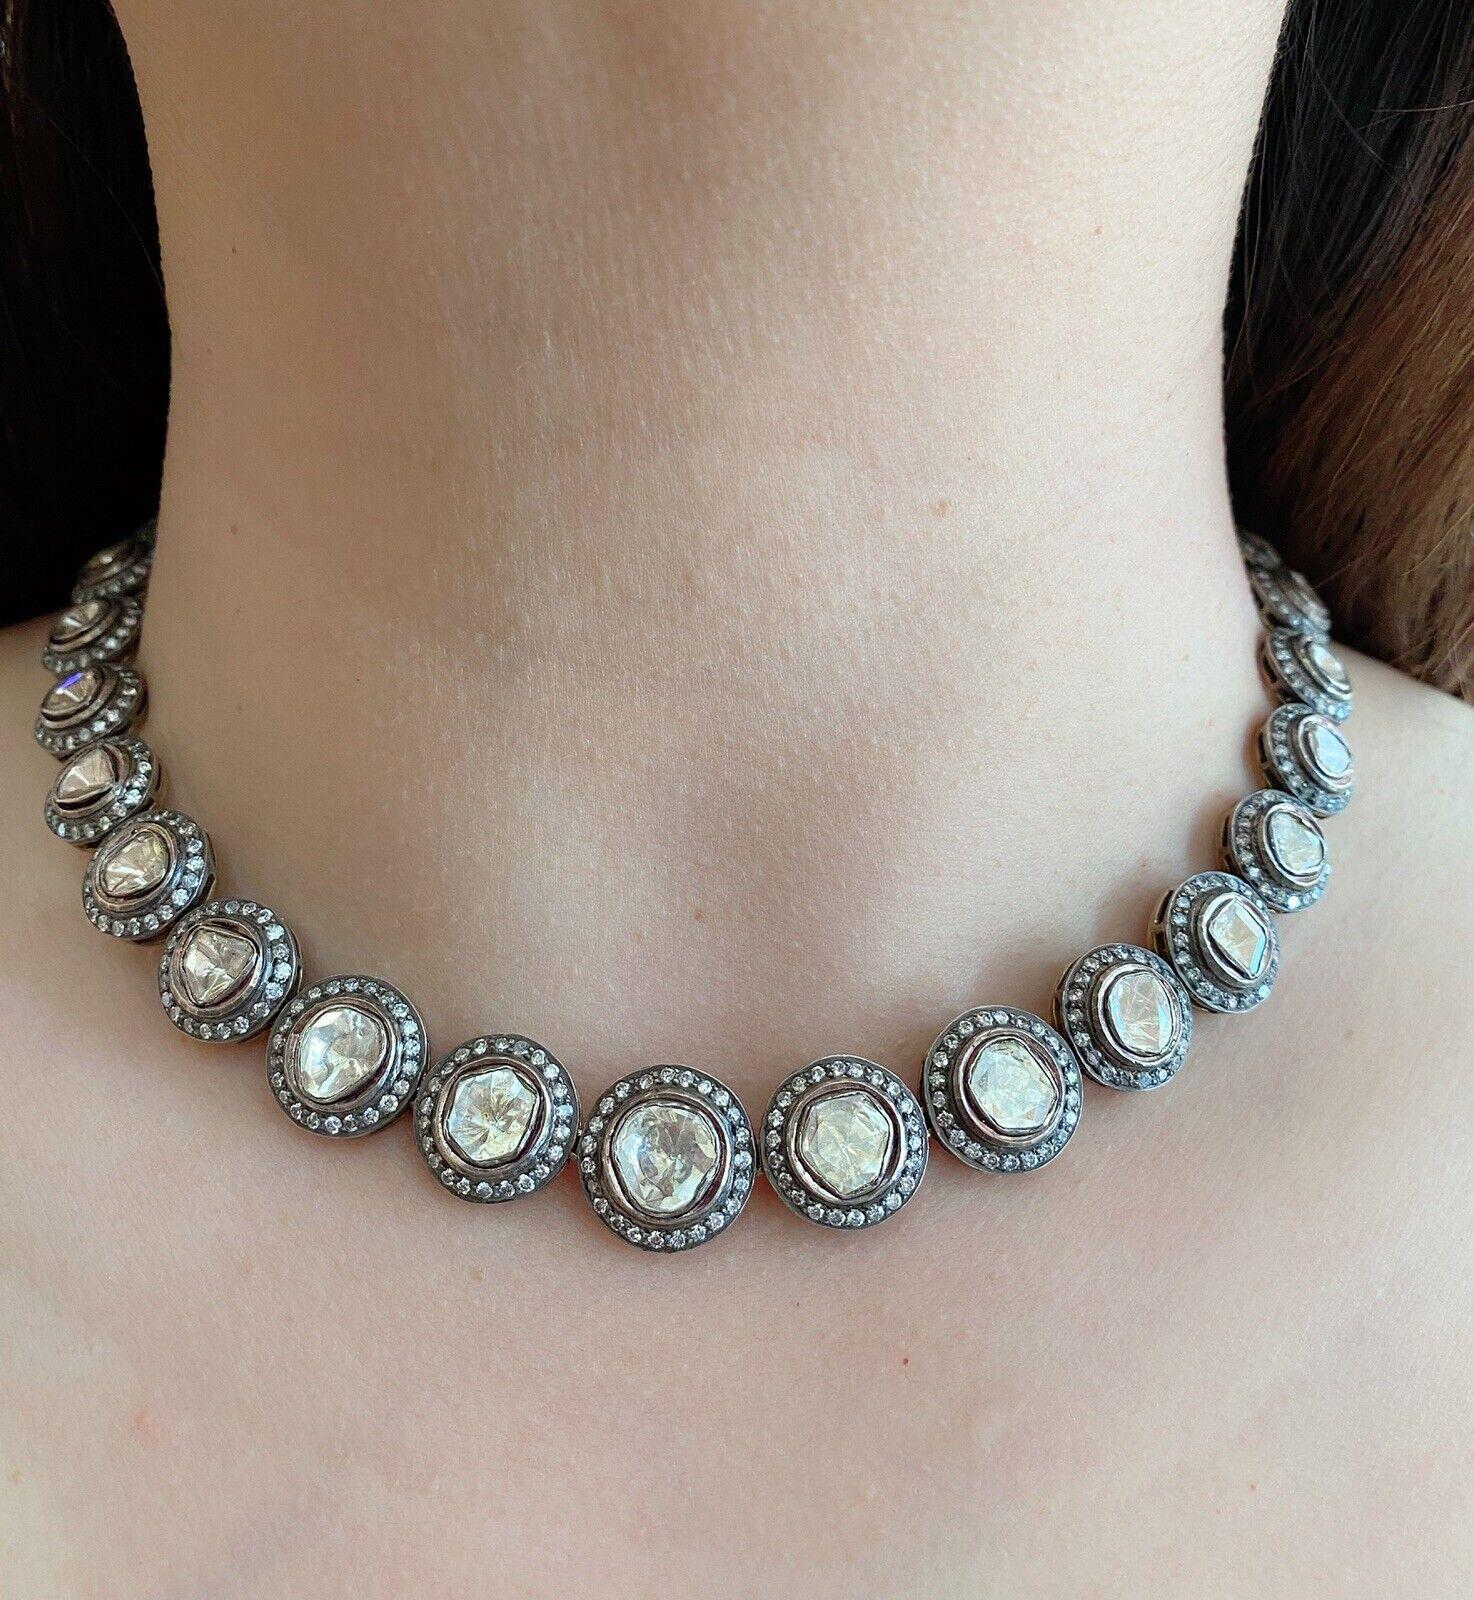 Rose Cut Diamond Choker Necklace 16 inches in 14k Yellow Gold and Silver

Rose cut Diamond Choker Necklace features graduating links of Flat Rose Cut Diamonds surrounded by bezels of Round Diamonds set in Silver and 14k Yellow Gold. The back side of